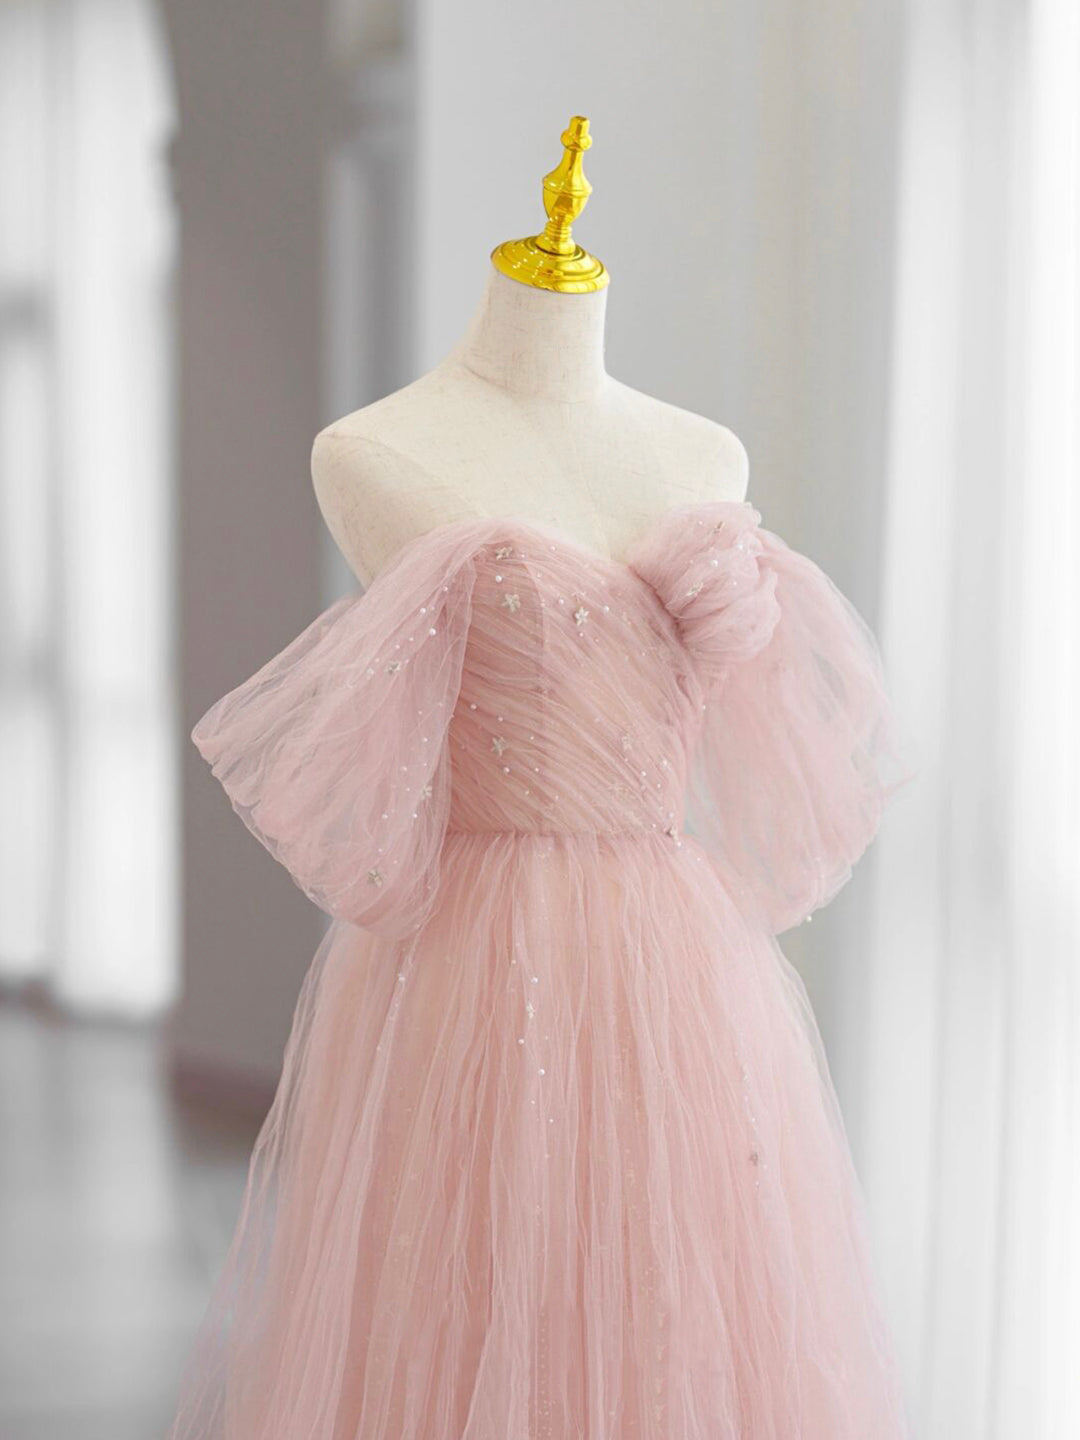 Homecoming Dresses Short Prom, Pink Tulle Long Prom Dress, Beautiful A-Line Off Shoulder Evening Dress